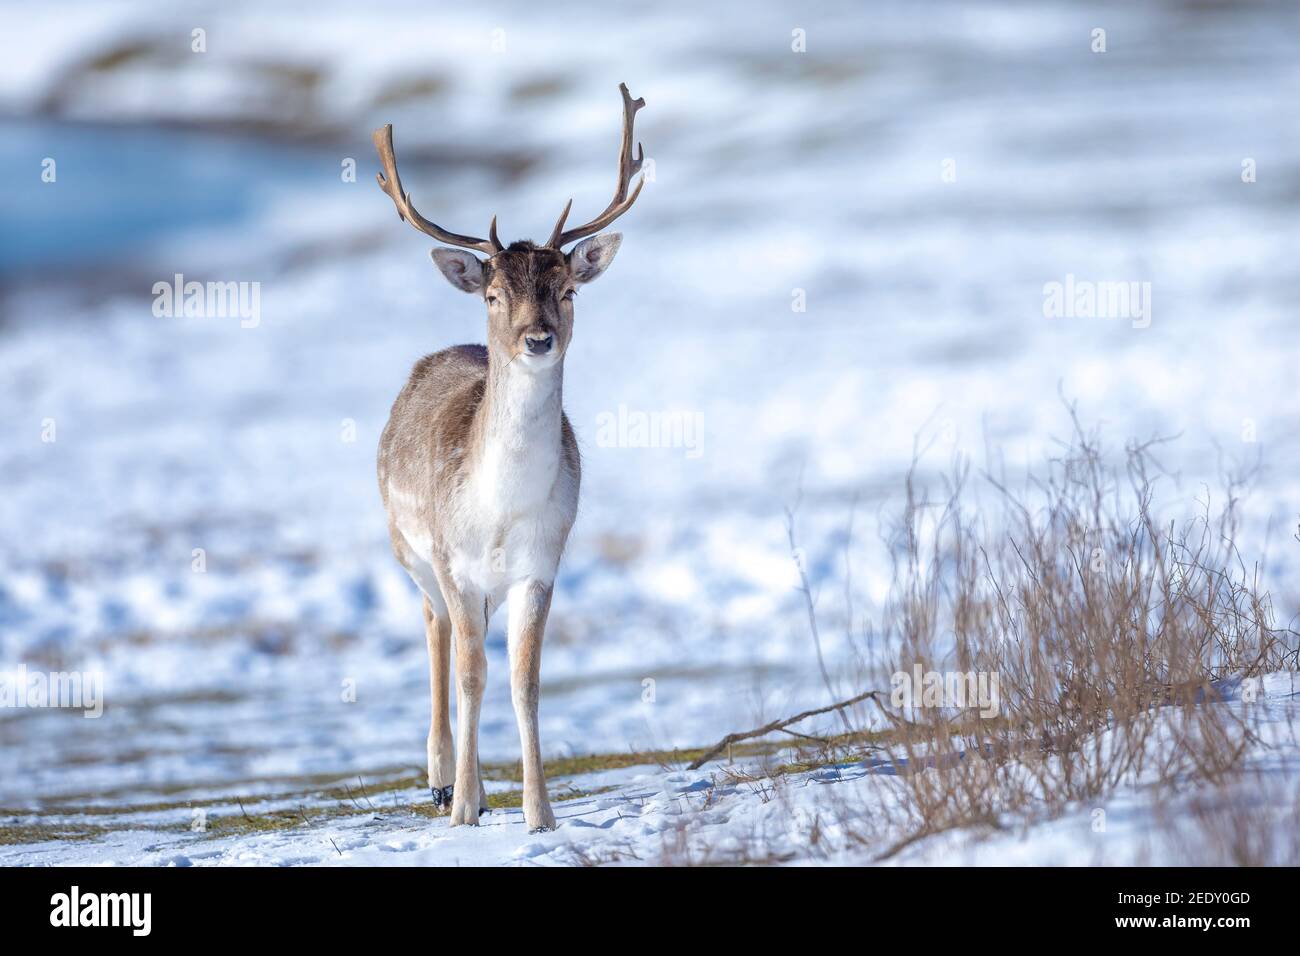 Fallow deer stag Dama Dama foraging in Winter forest snow and ice, selective focus is used. Stock Photo